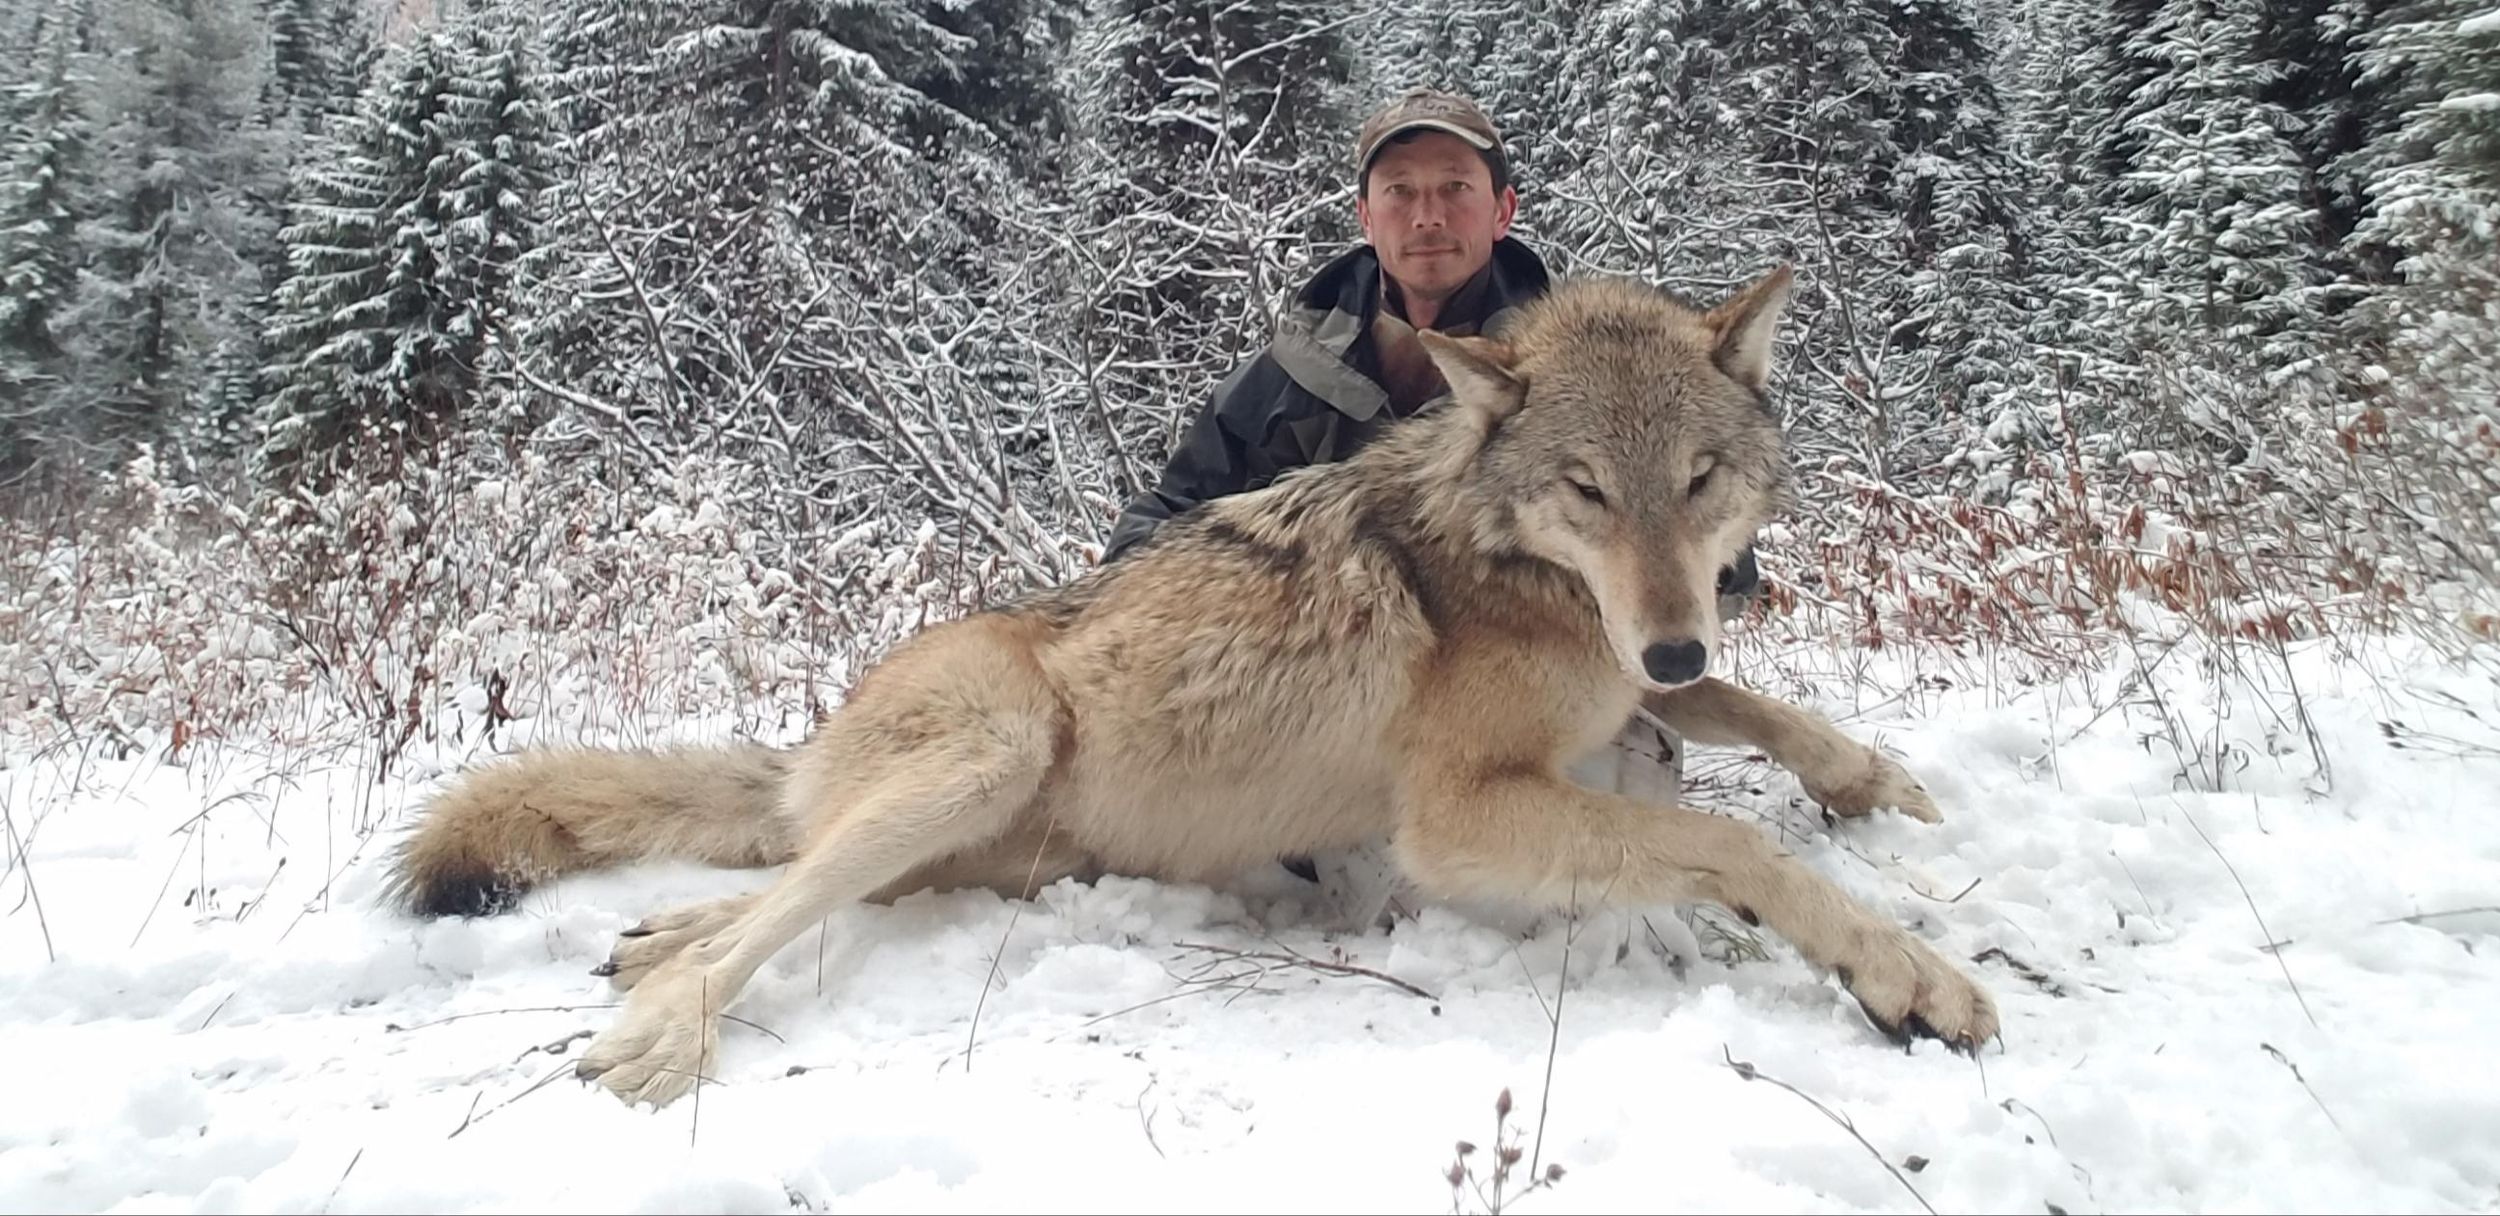 Wolf trapping is a tool Idaho wildlife managers want to keep, but at